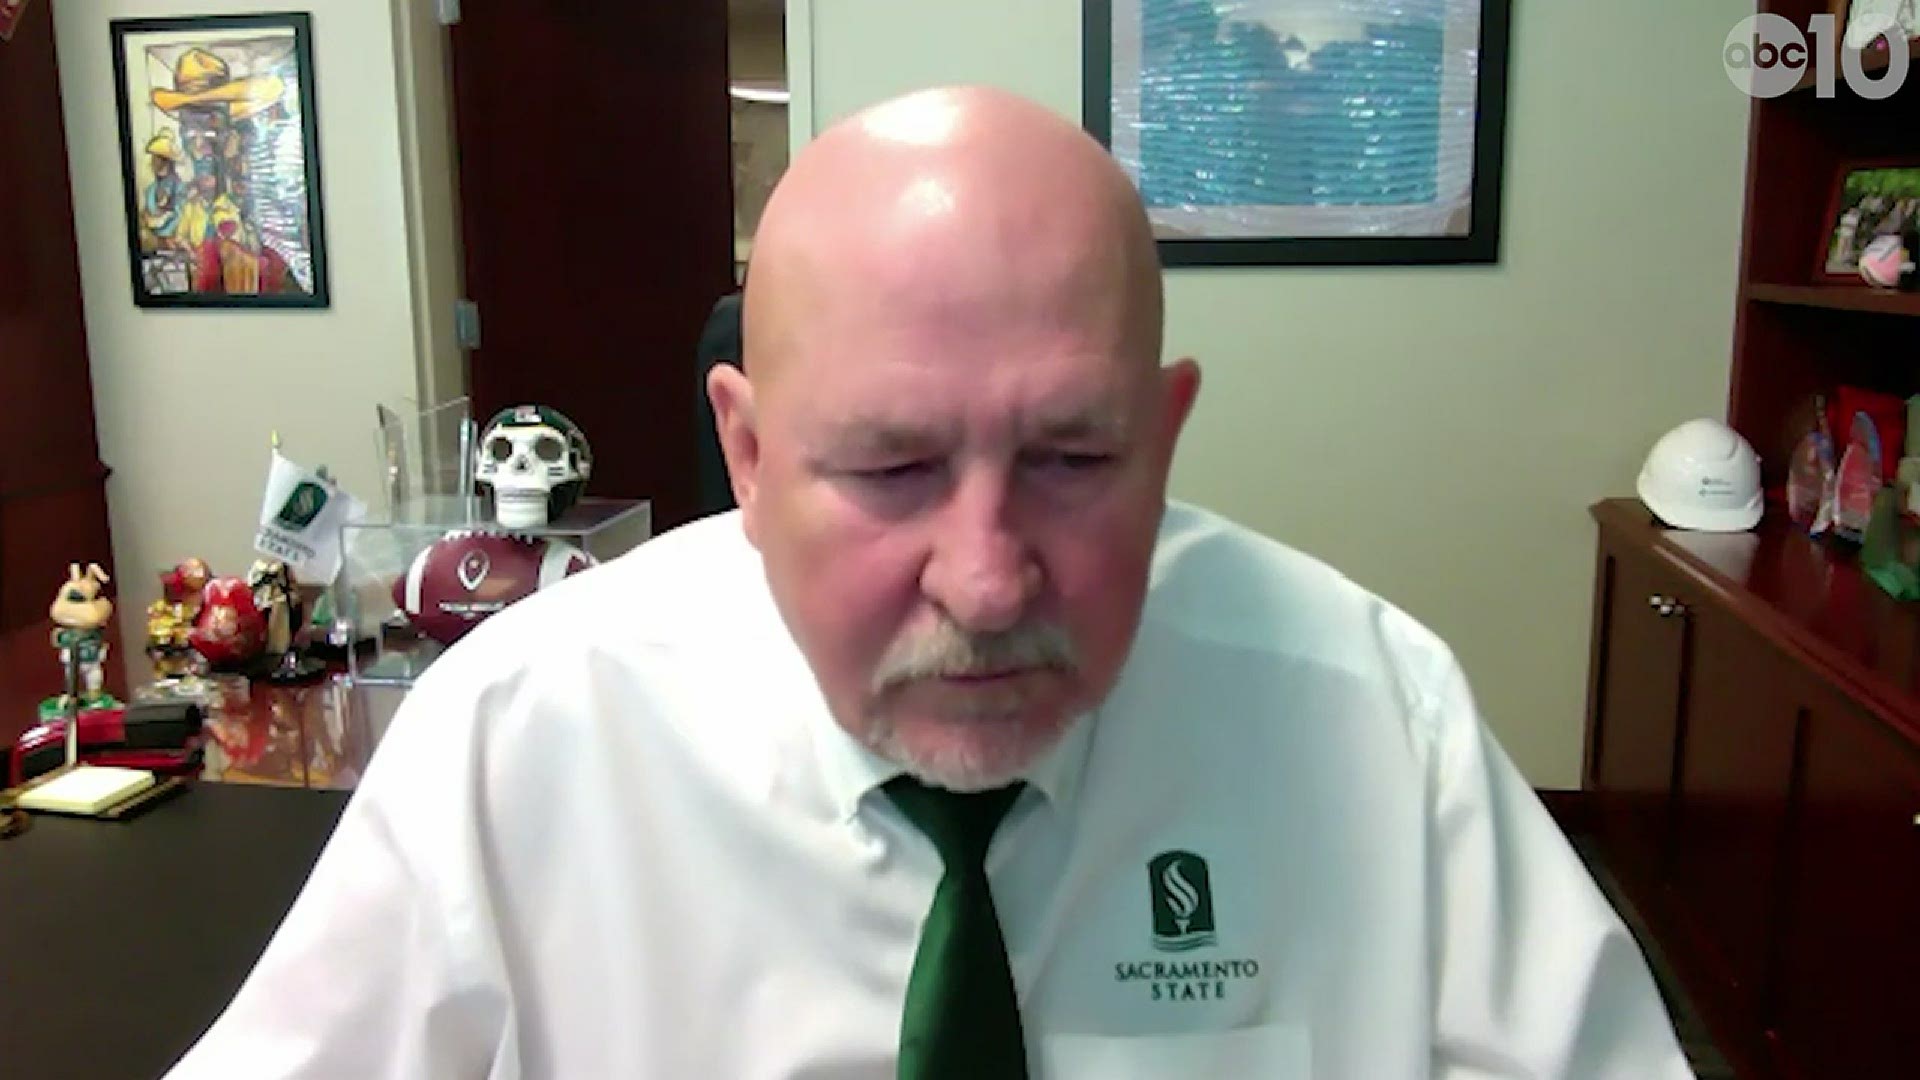 Sacramento State President Robert Nelsen spoke with Eric Escalante about the school now requiring on-campus students, staff, and faculty to get vaccinated.